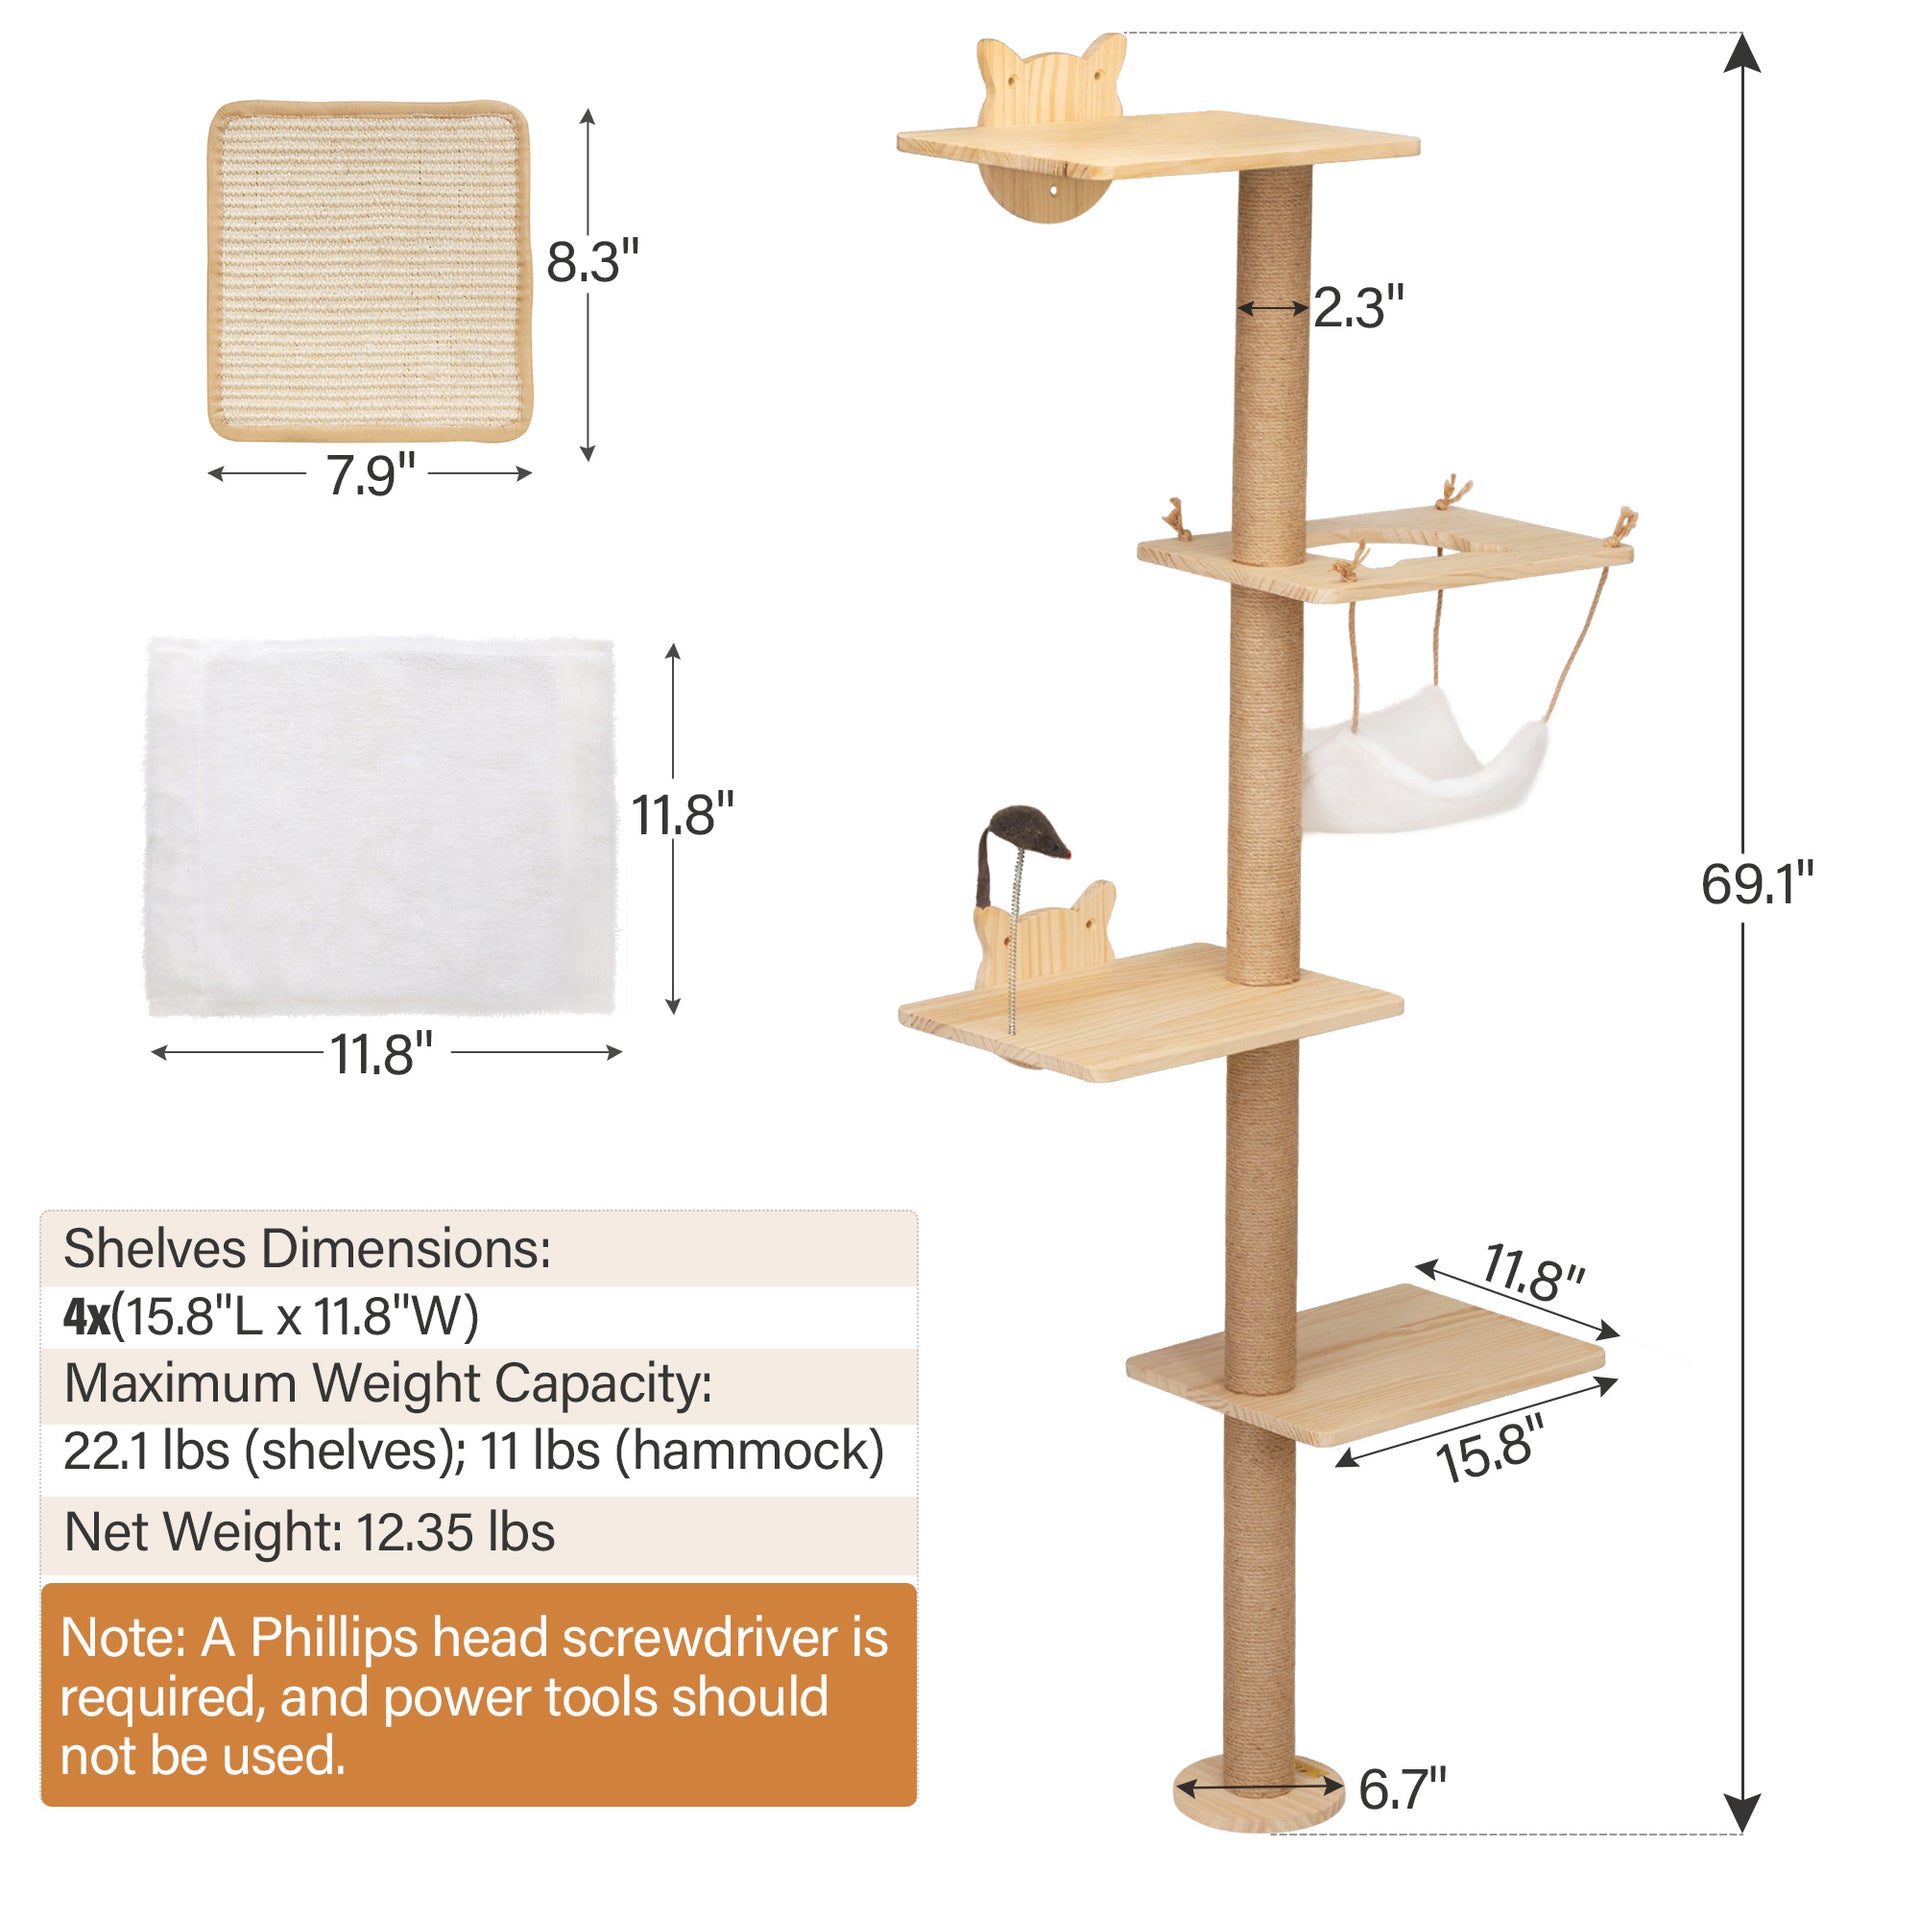 Wall-Mounted Cat Scratching Pole with Perches